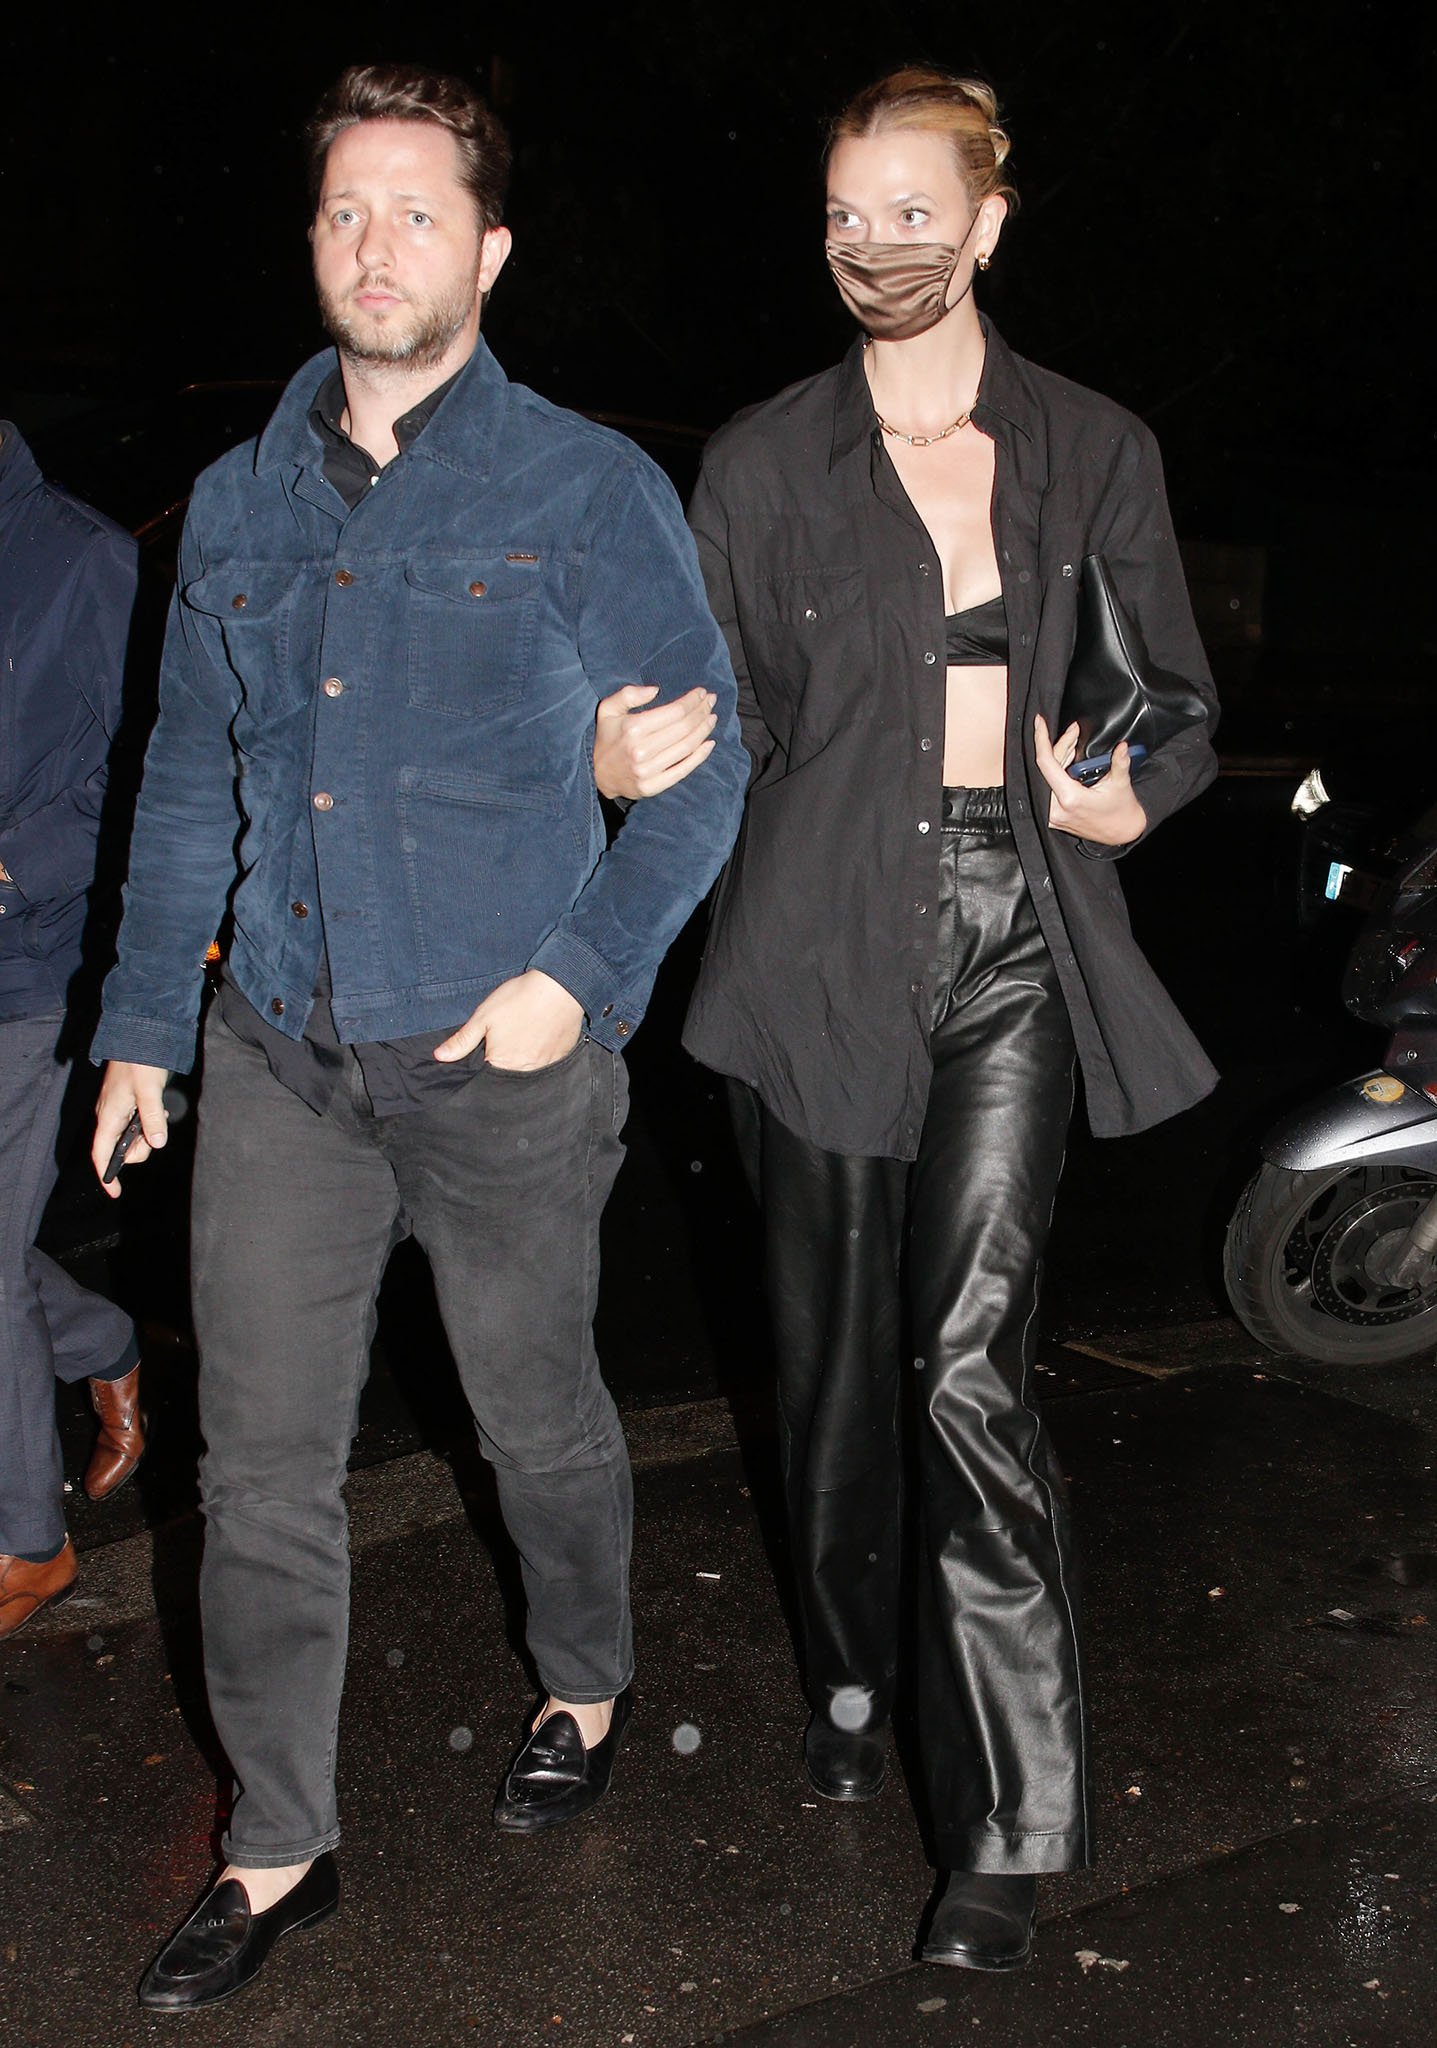 TV personality Derek Blasberg and supermodel Karlie Kloss arriving at Laperouse restaurant during the Paris Fashion Week on October 2, 2021